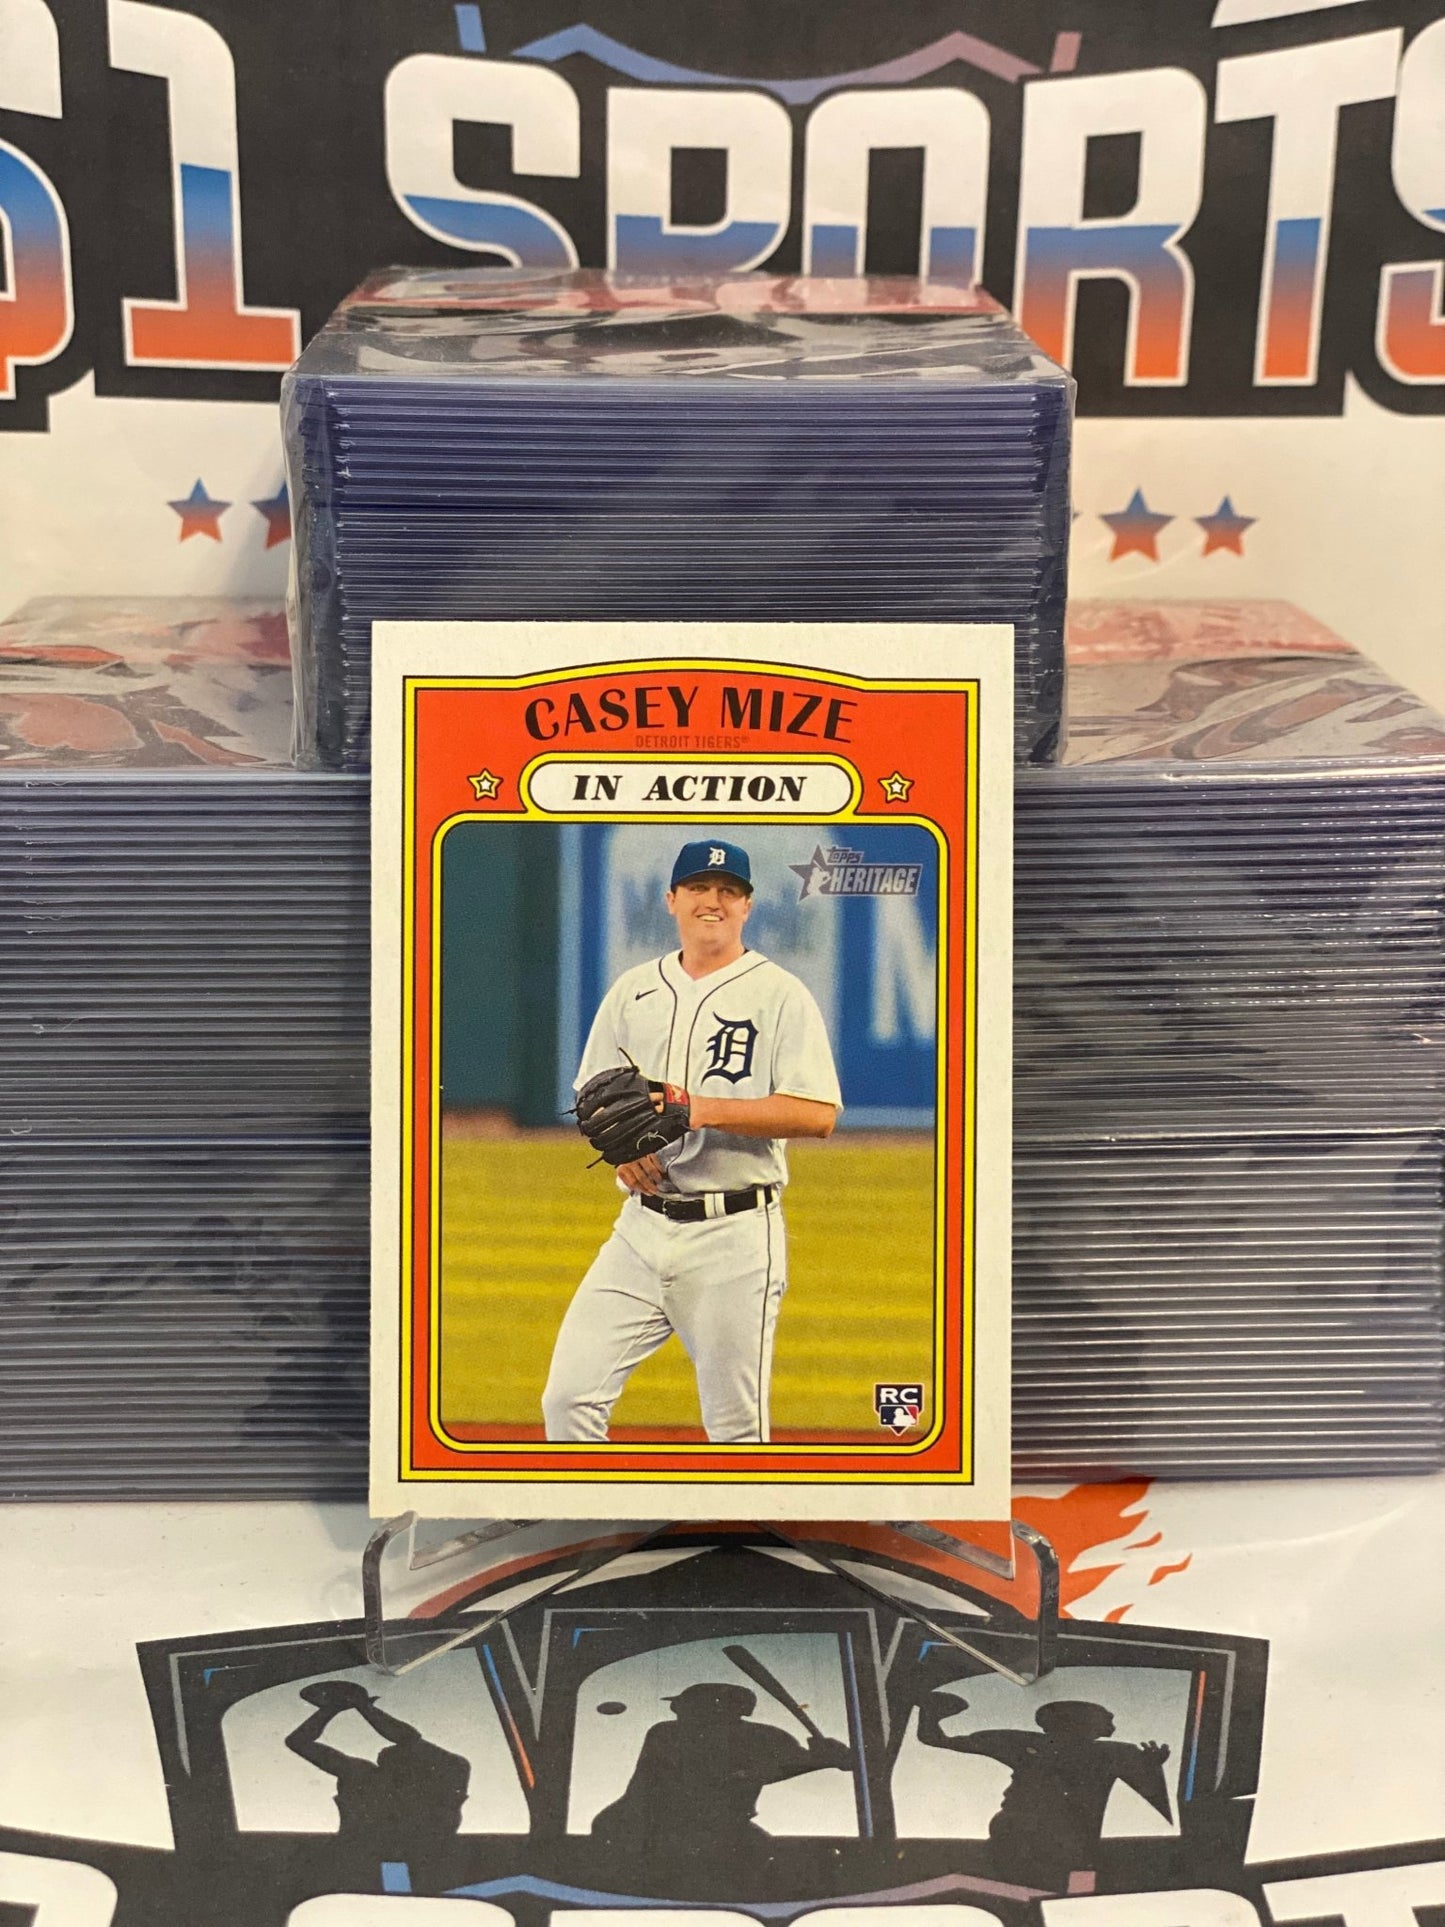 2021 Topps Heritage (In Action) Casey Mize Rookie #254